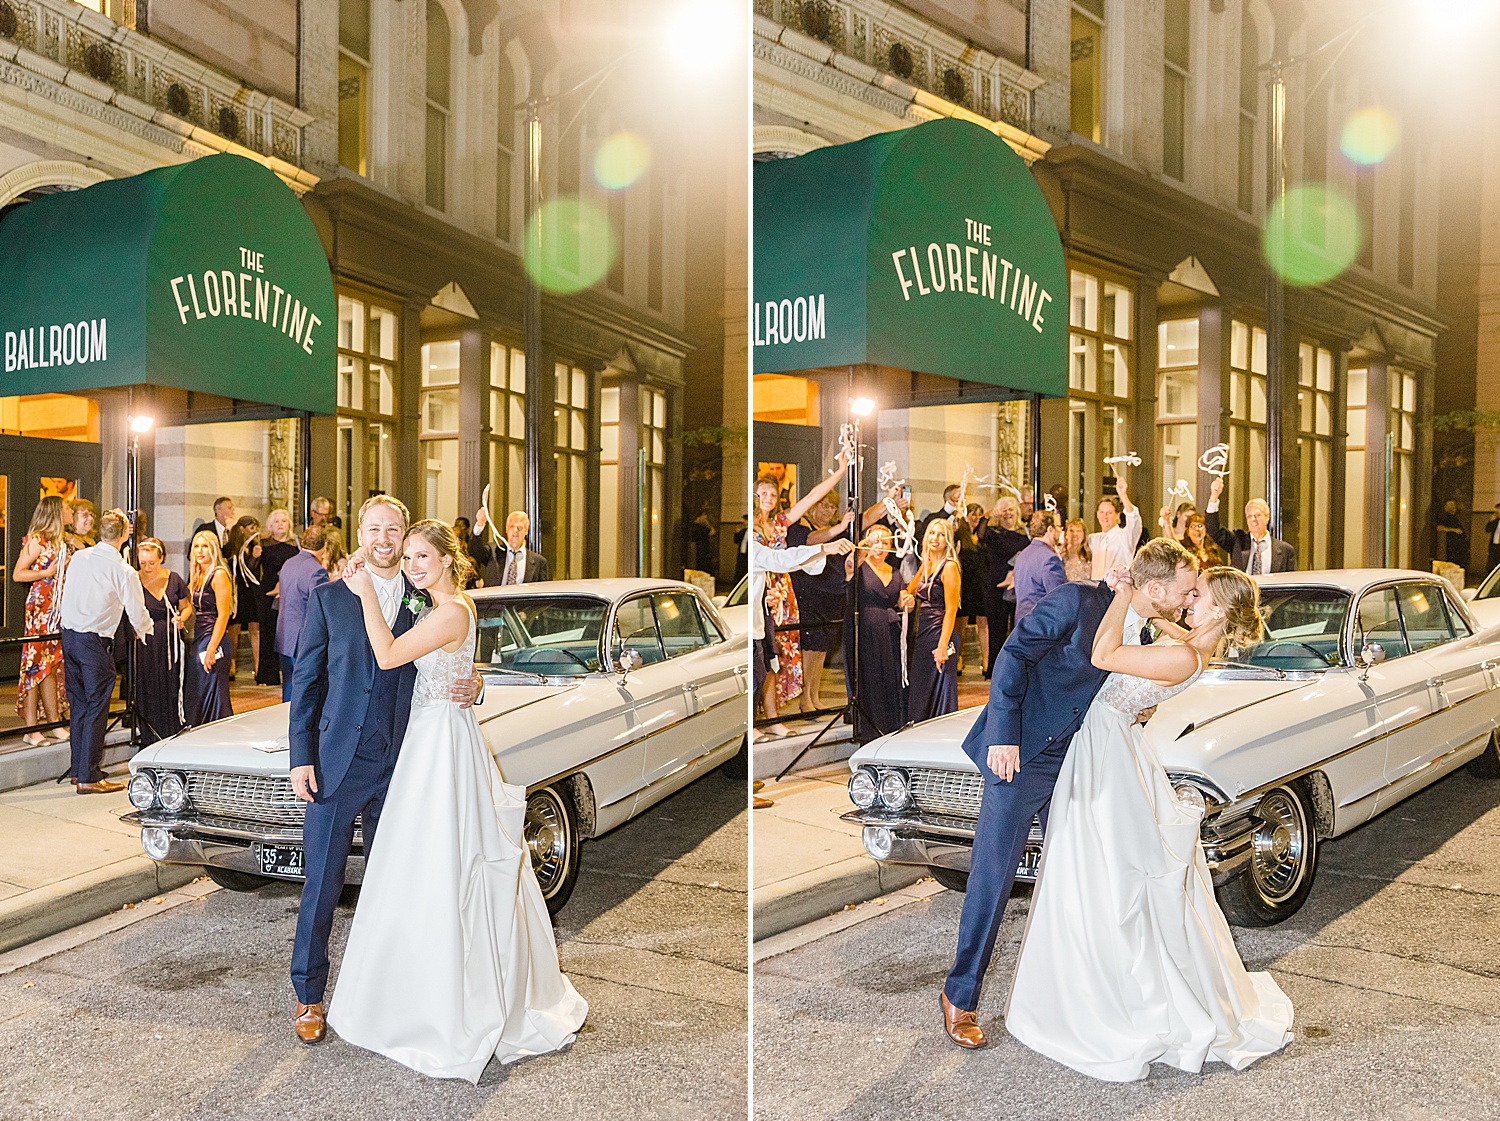 newlyweds kiss outside The Florentine Building at the end of their wedding night in Birmingham, AL